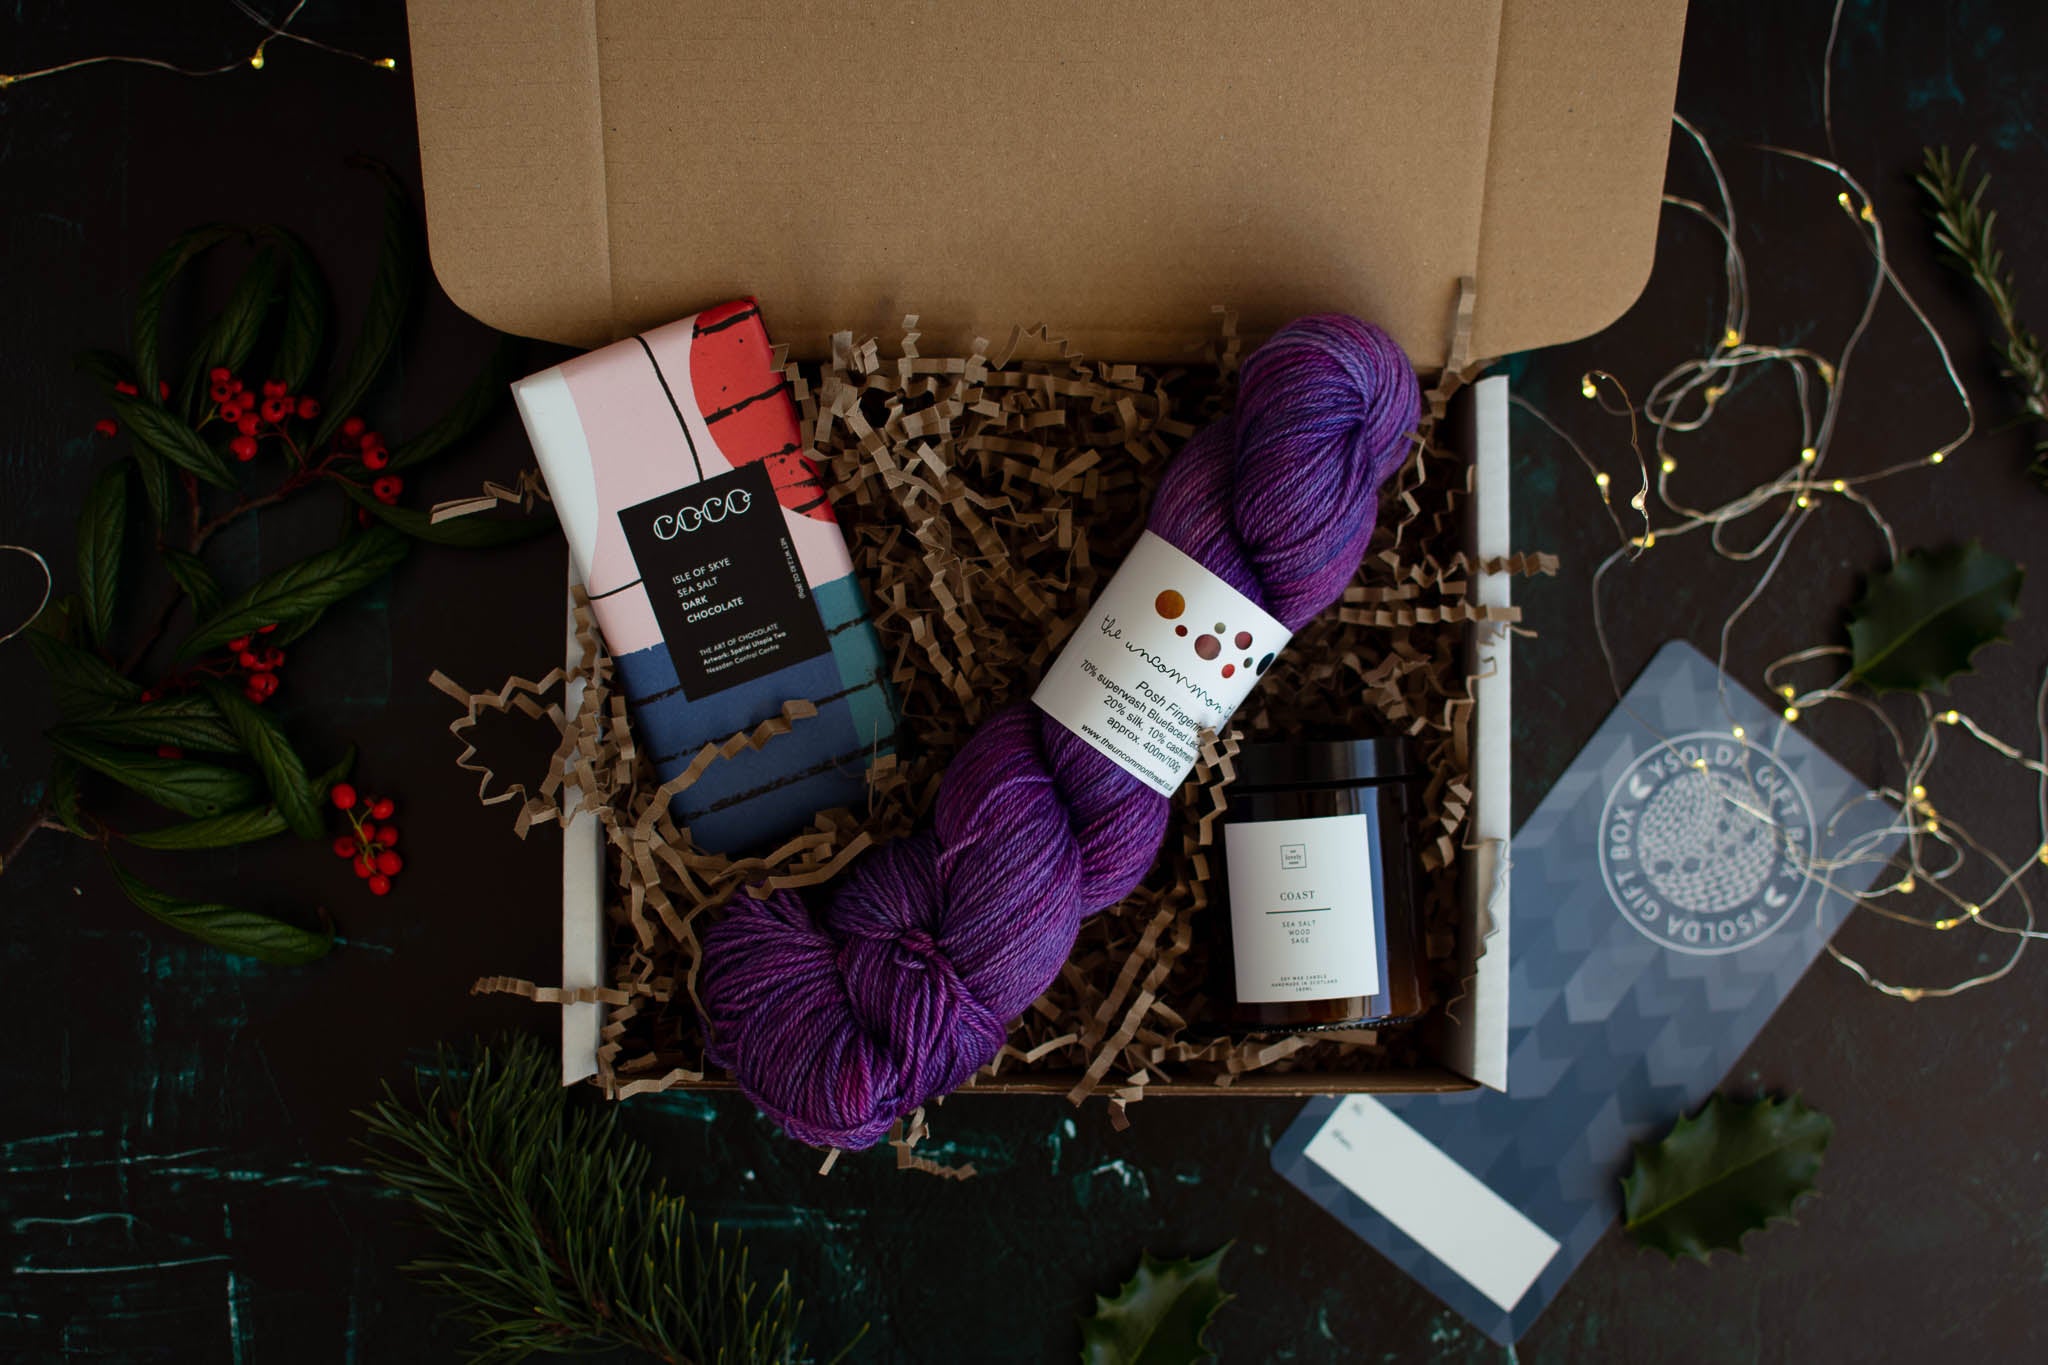 An open box containing a bar of chocolate, a purple skein of yarn and a candle.